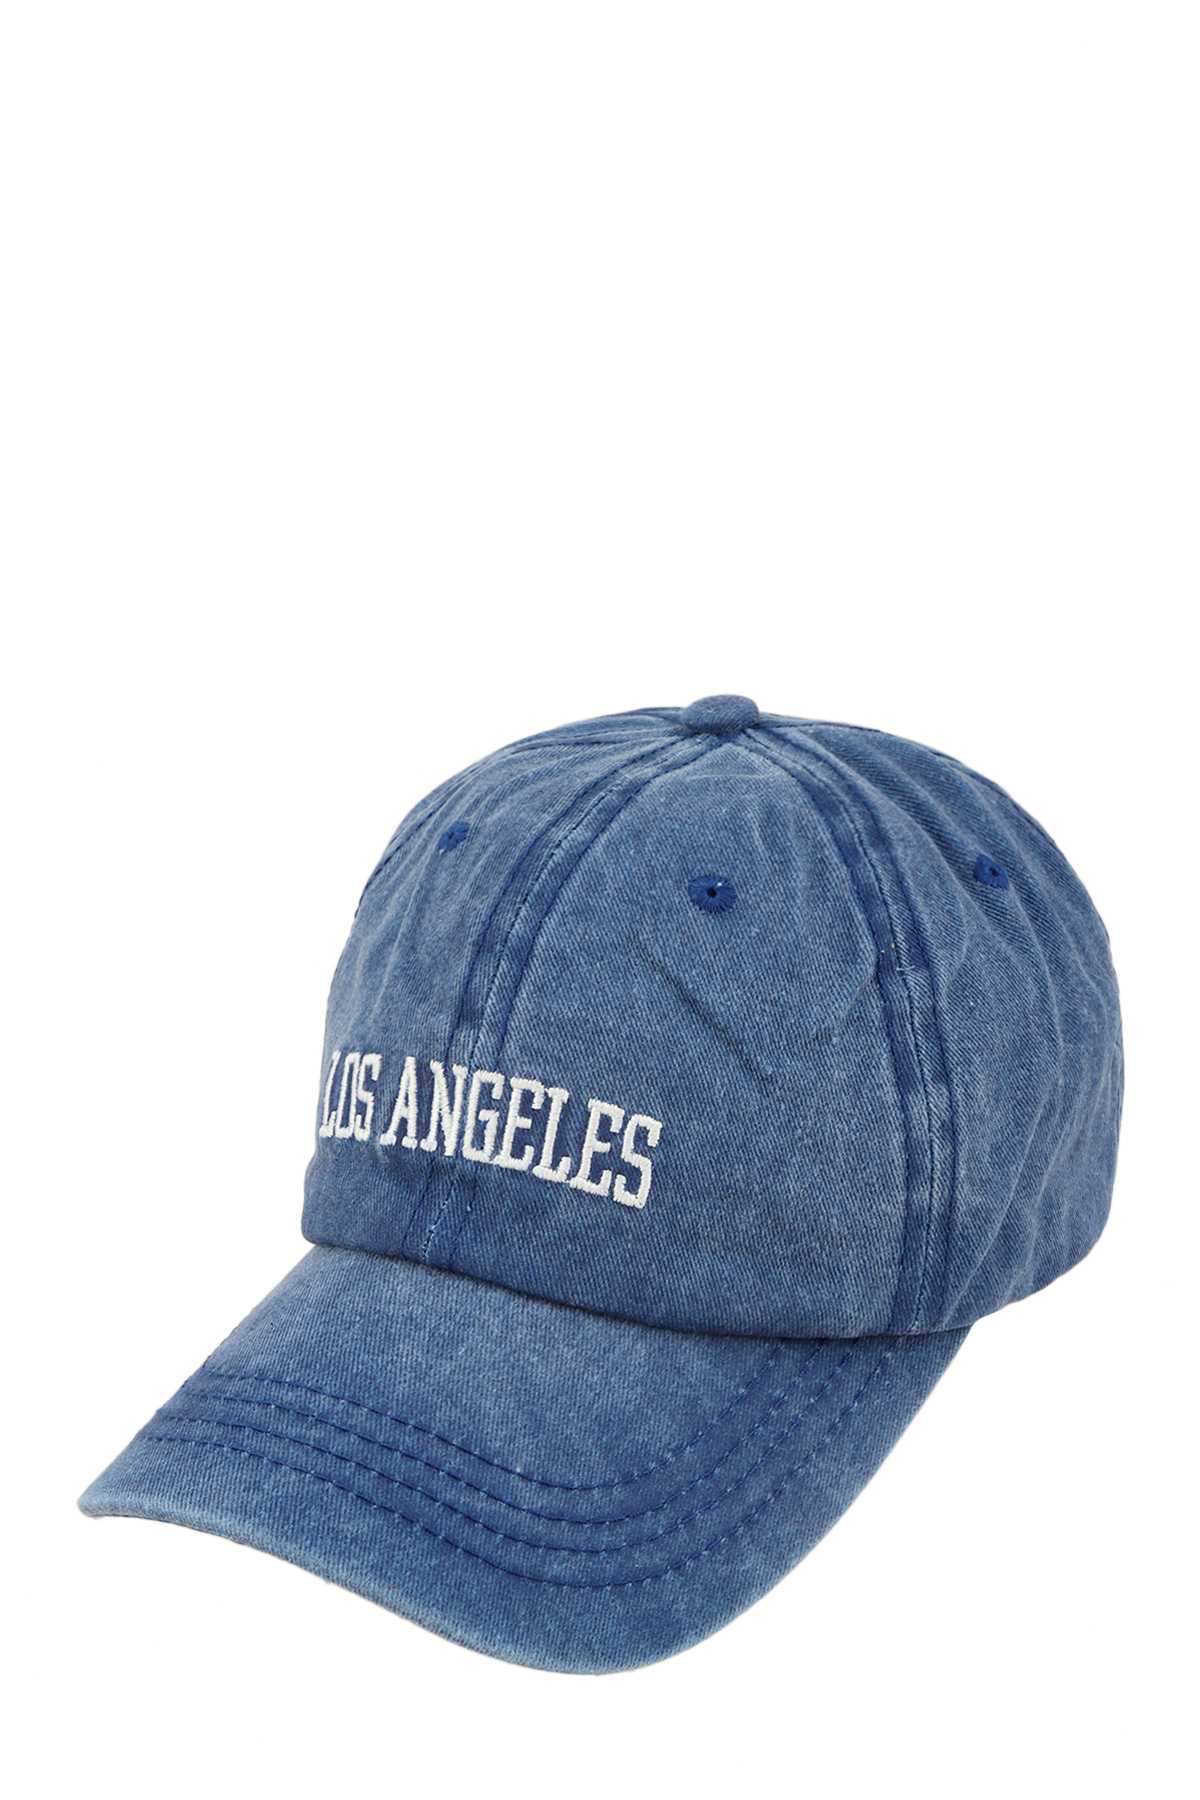 LOS ANGELES Embroidery Pigment Cap